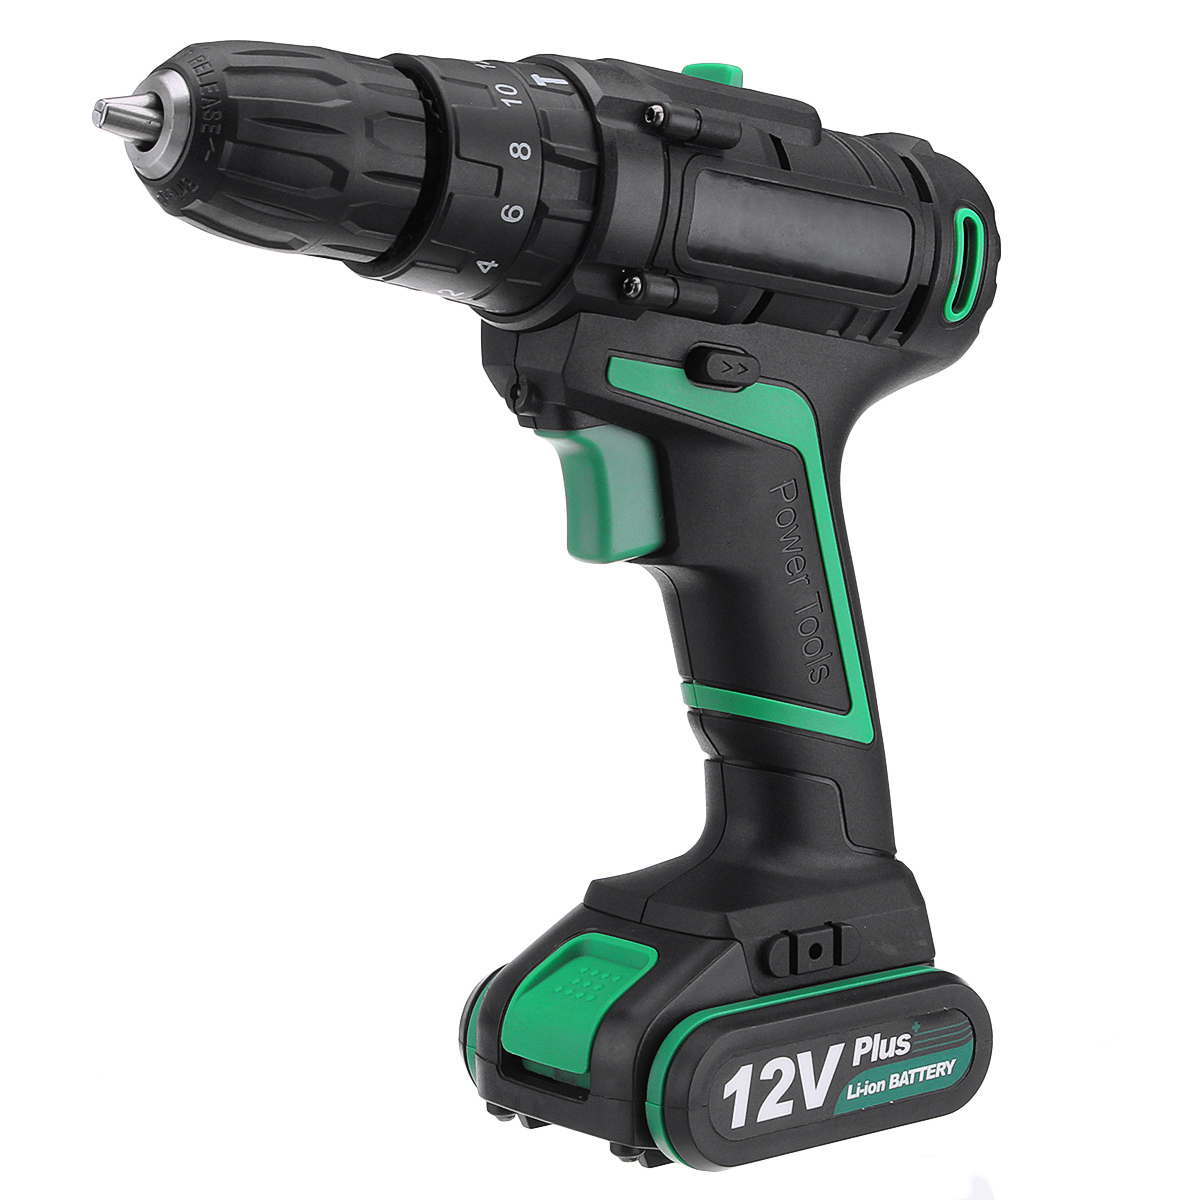 AC100-240V-Electric-Screwdriver-Cordless-Power-Drill-Tools-Dual-Speed-Impact-With-Accessories-1285297-4